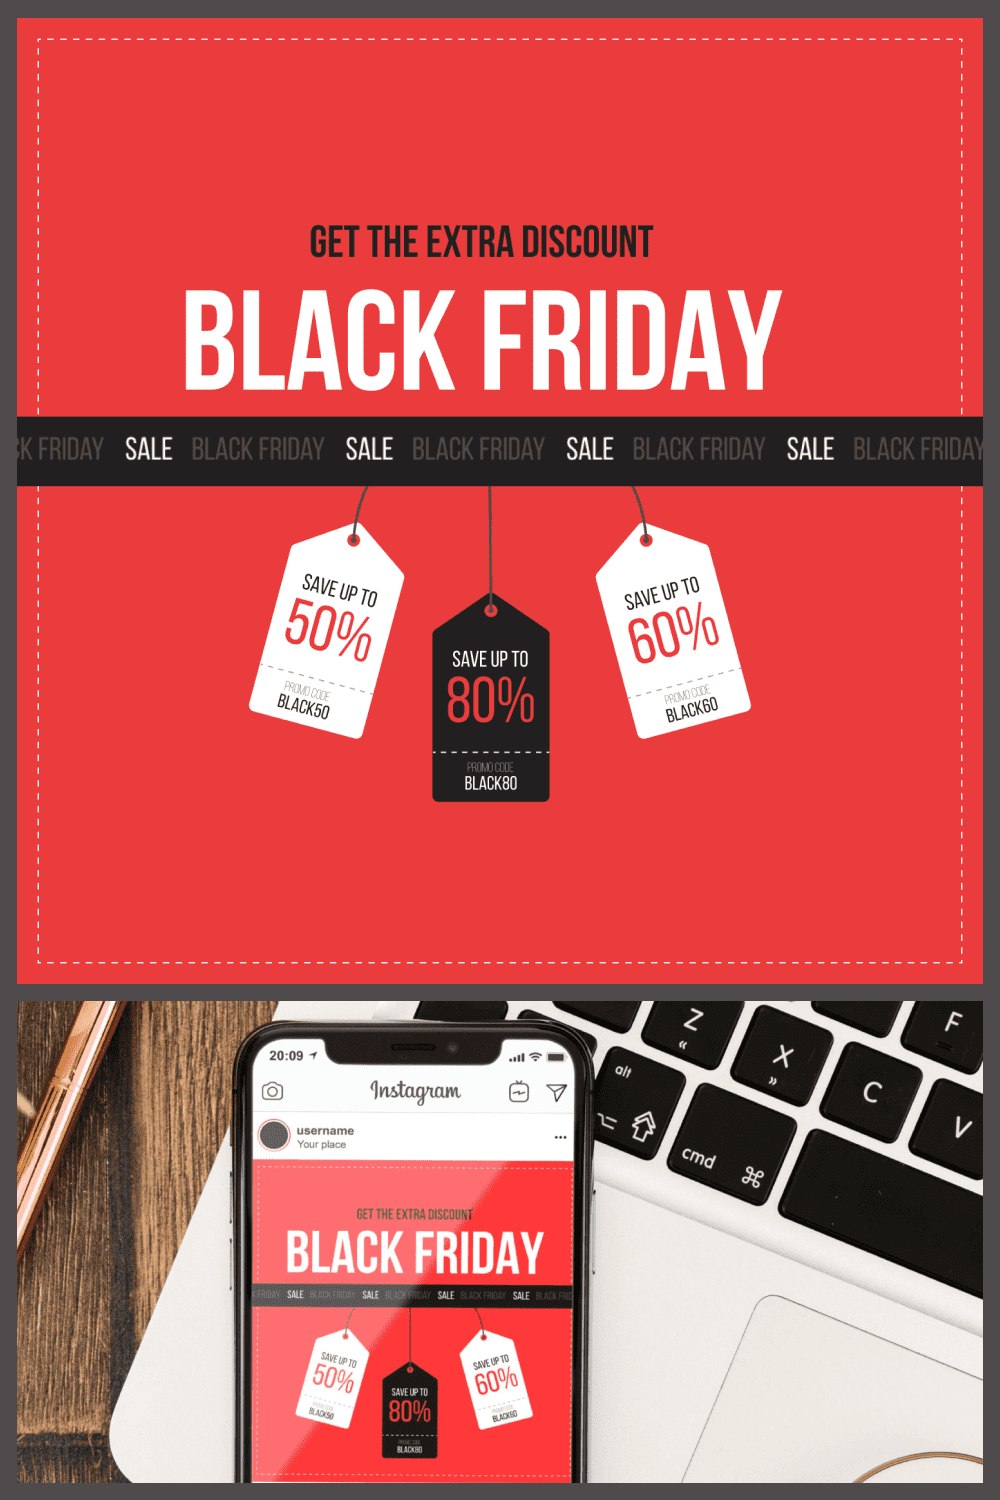 Social Media Banners in Black, Red, and White Colors for Black Friday.